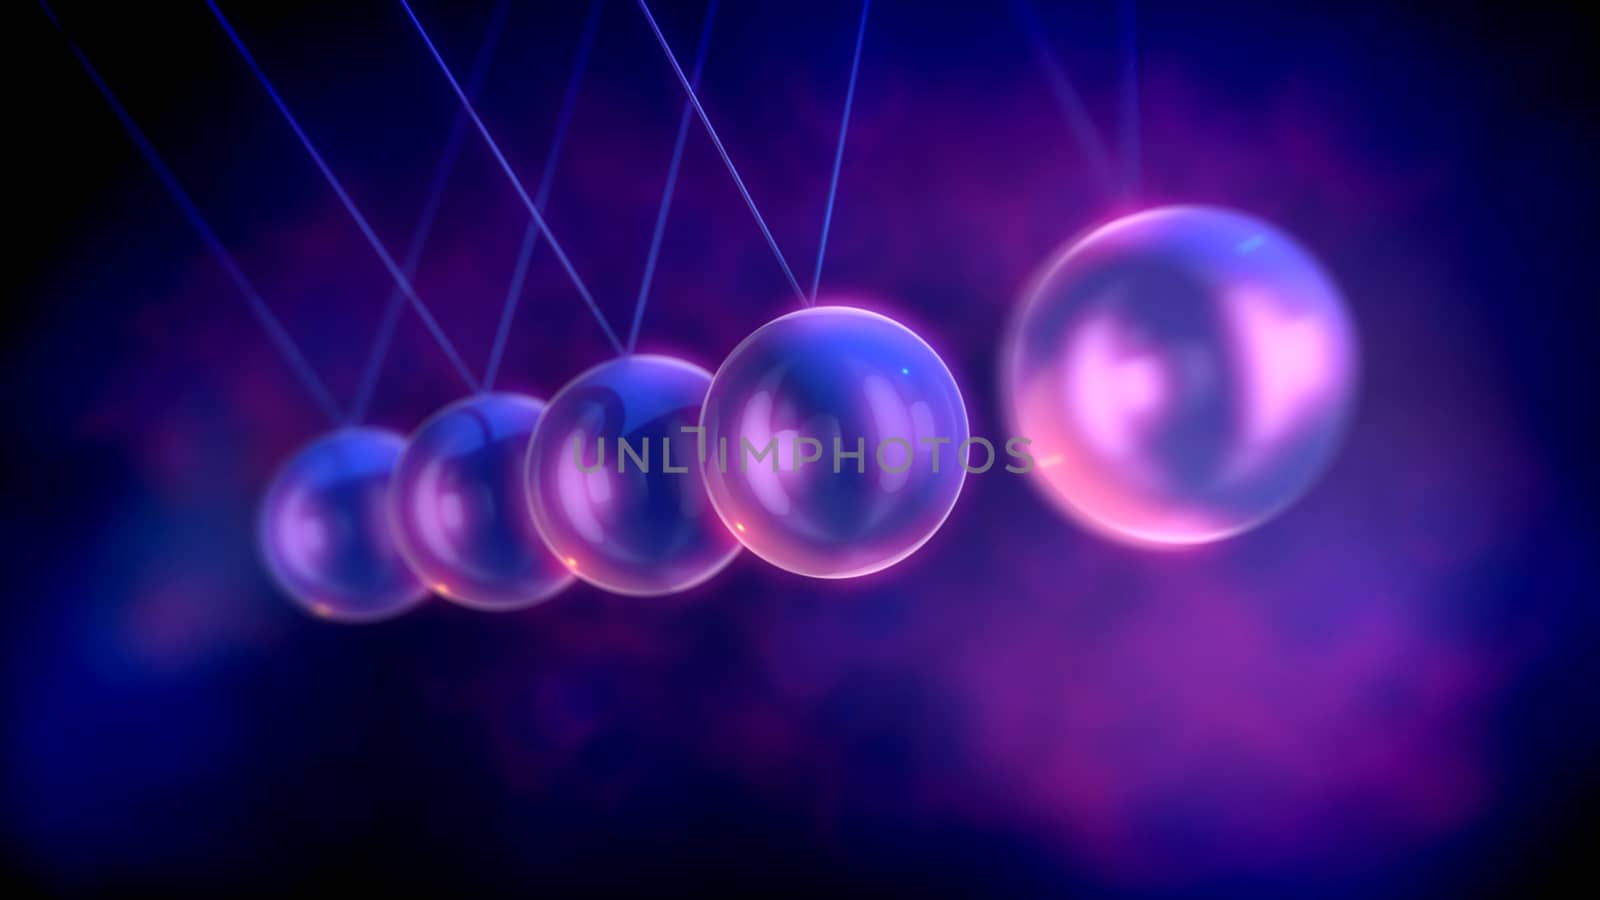 A meditative 3d illustration of steel beads pendulum with waving balls beating each other in a violet background with blurred and bright spots. They remind us that our life is not endless .